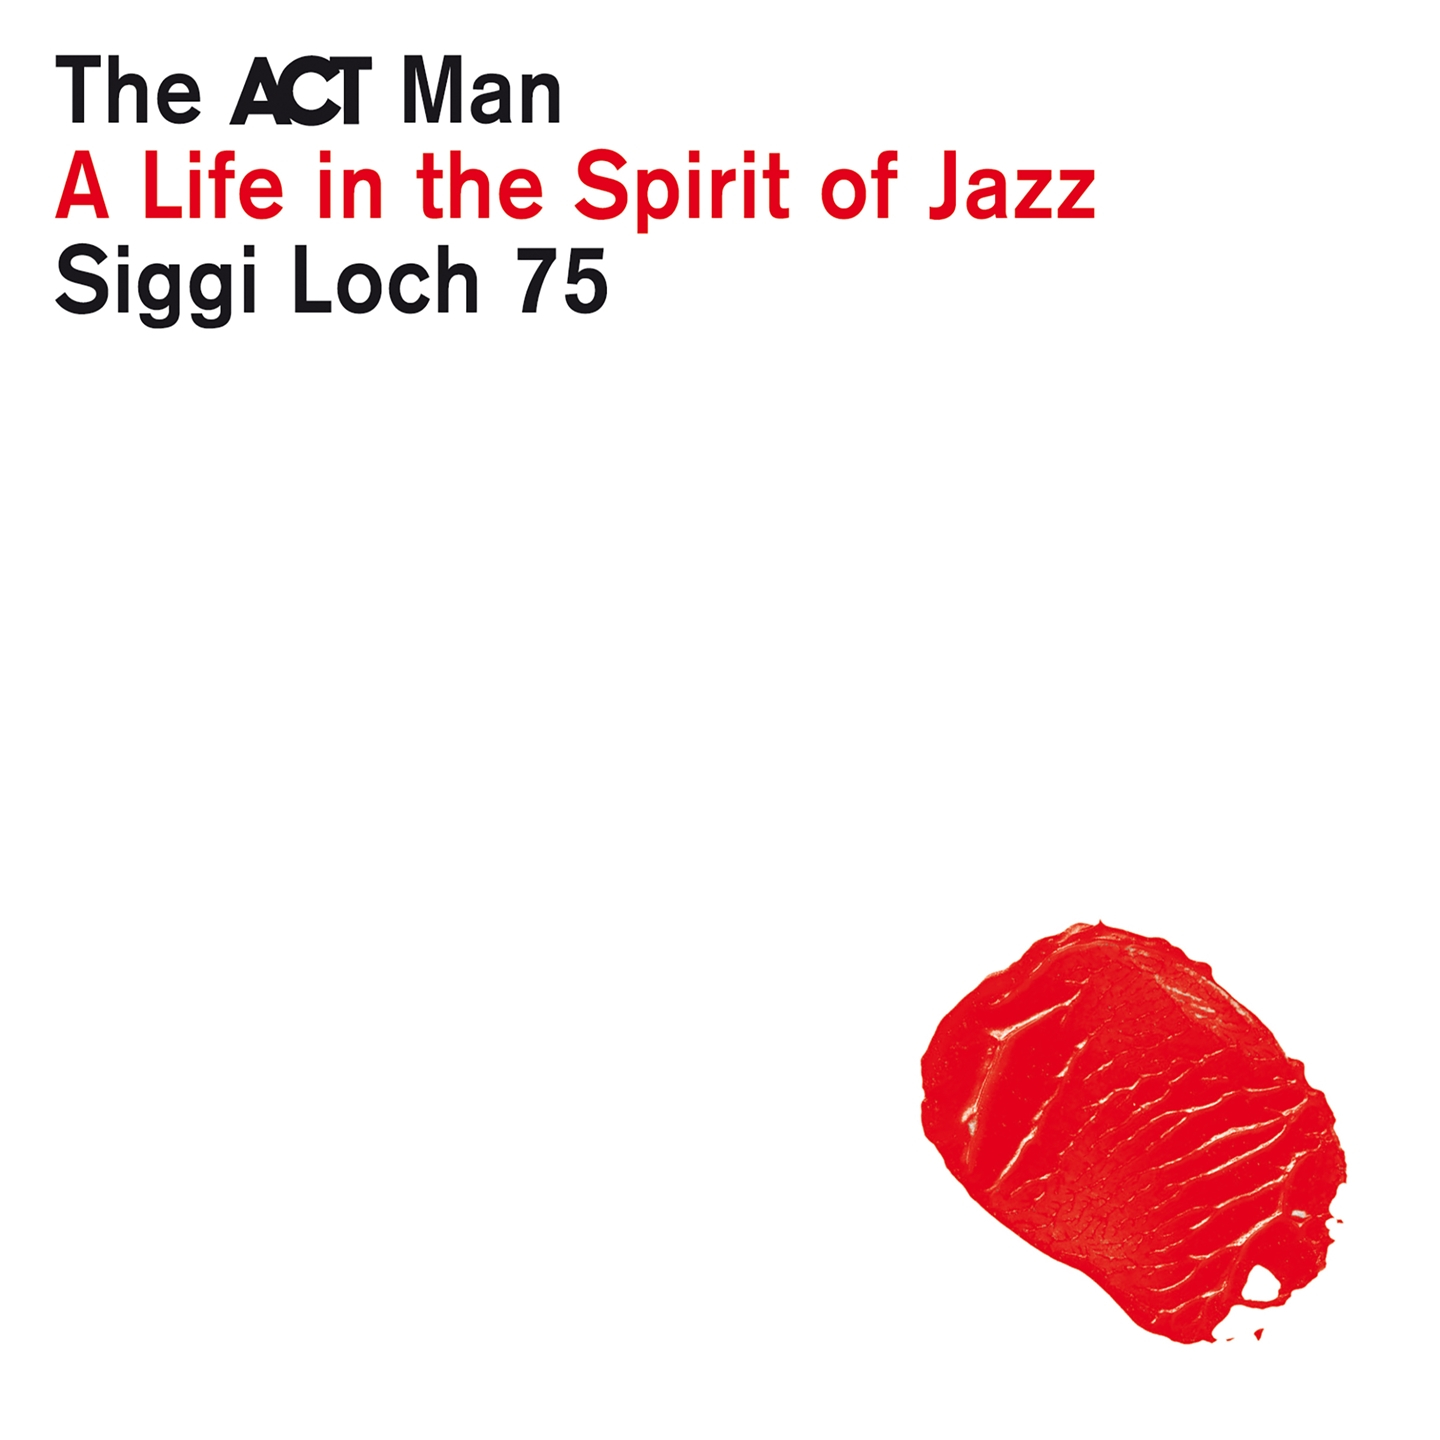 THE ACT MAN - SIGGI LOCH 75 - A LIFE IN THE SPIRIT OF JAZZ